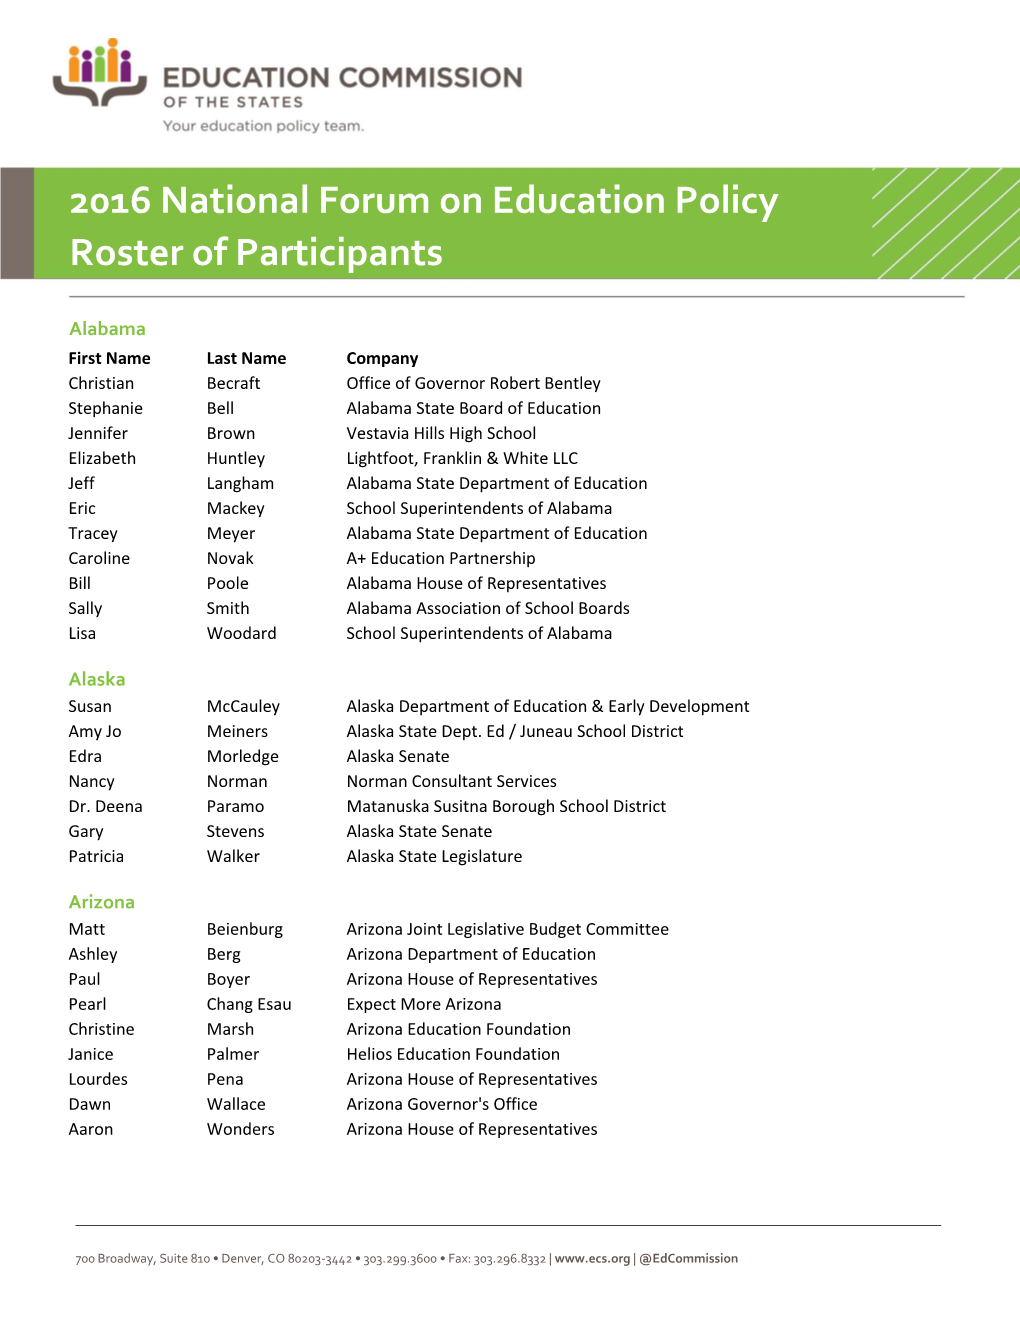 2016 National Forum on Education Policy Roster of Participants